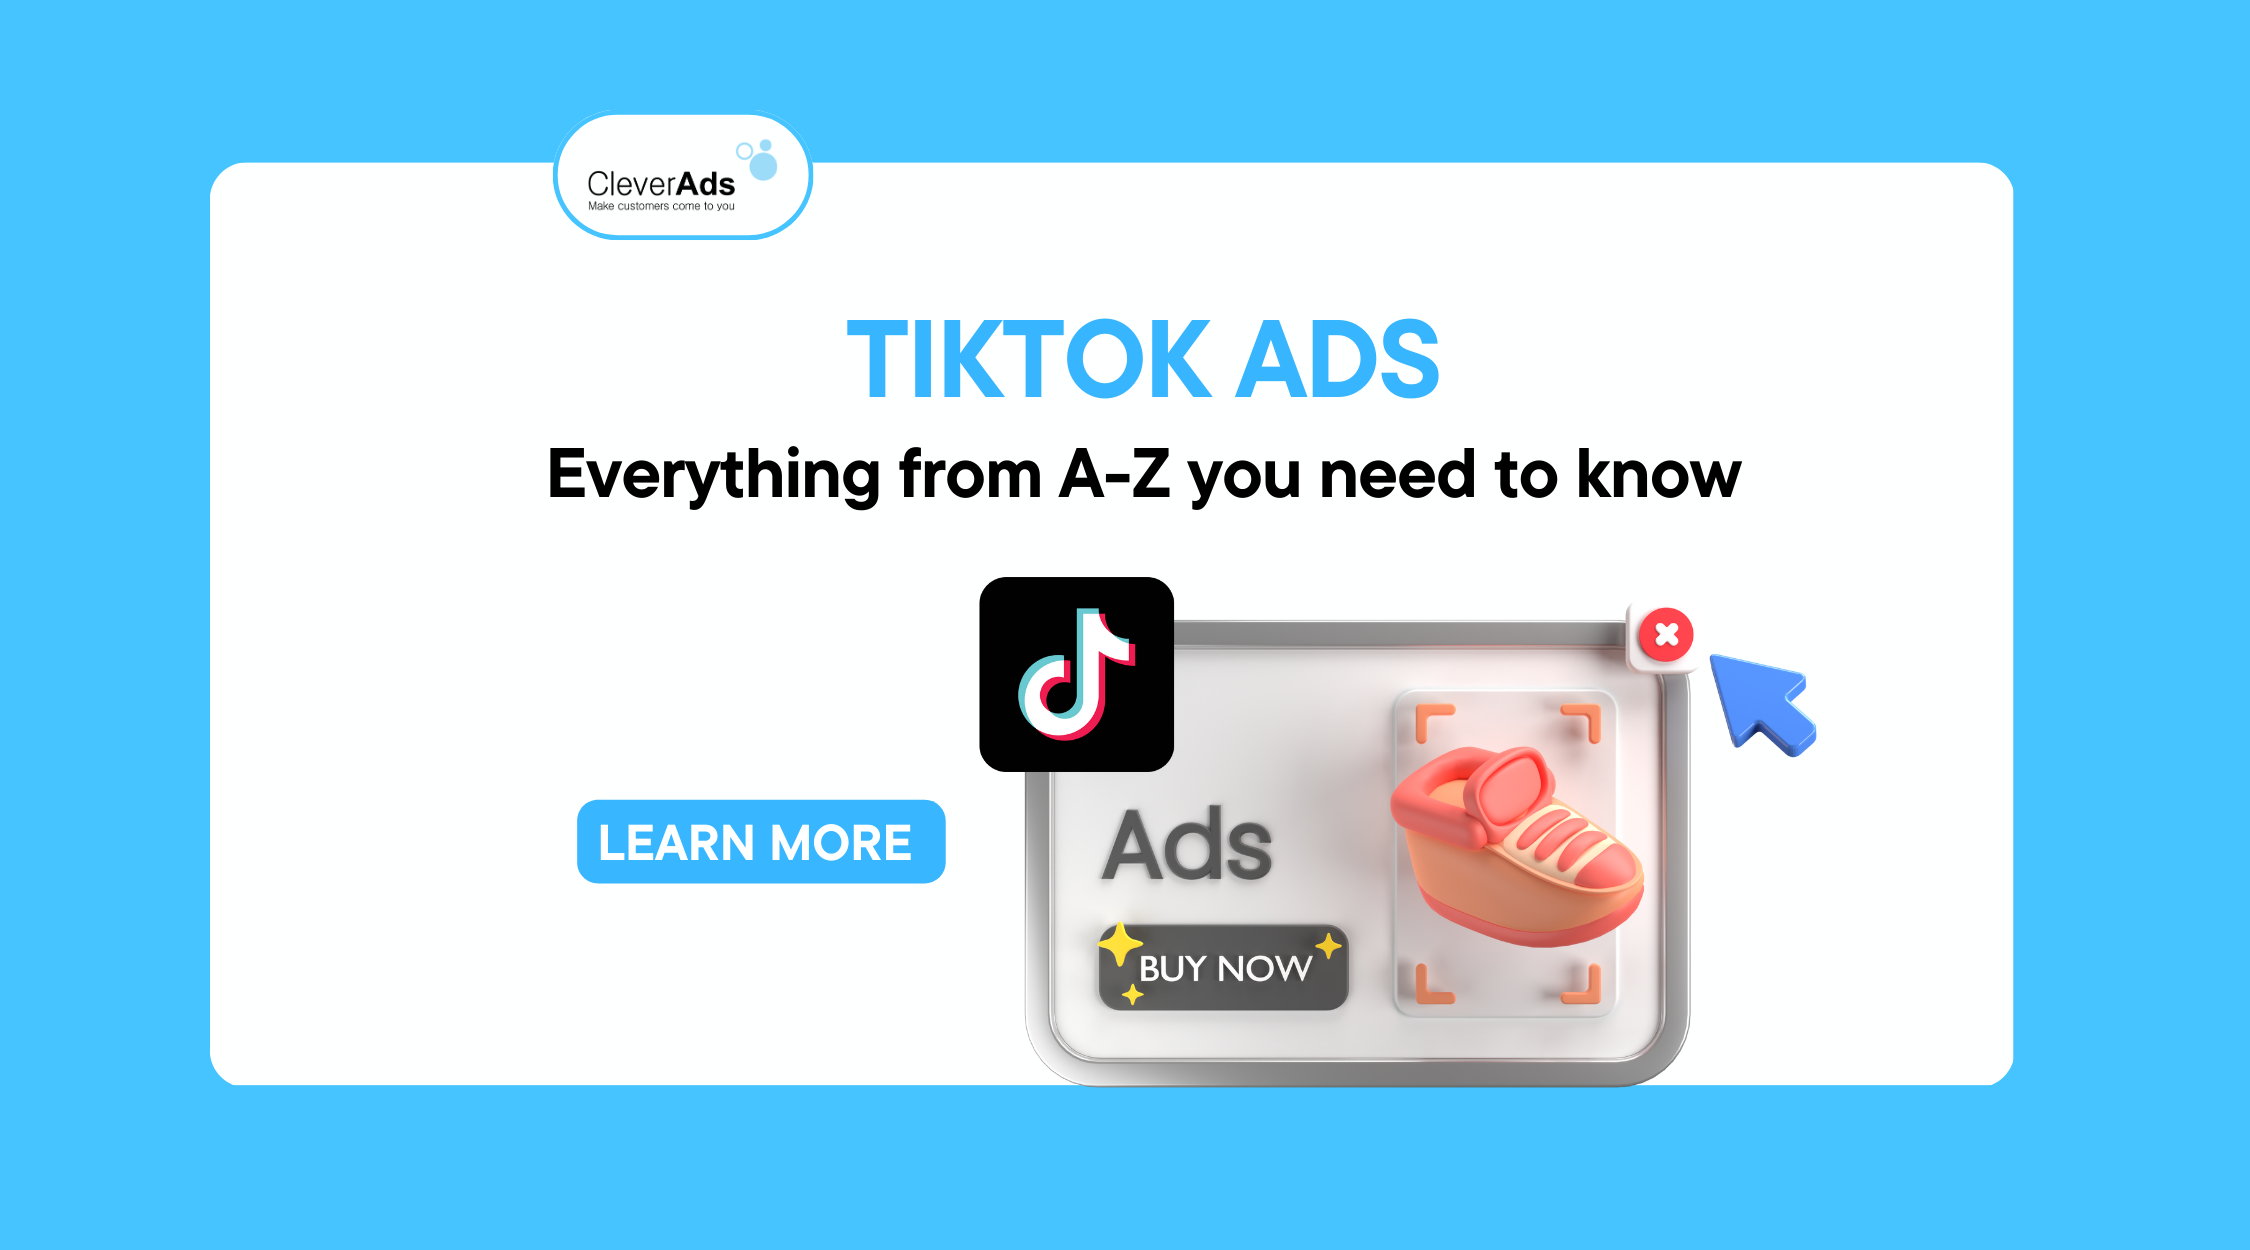 TikTok Ads: Everything from A-Z you need to know